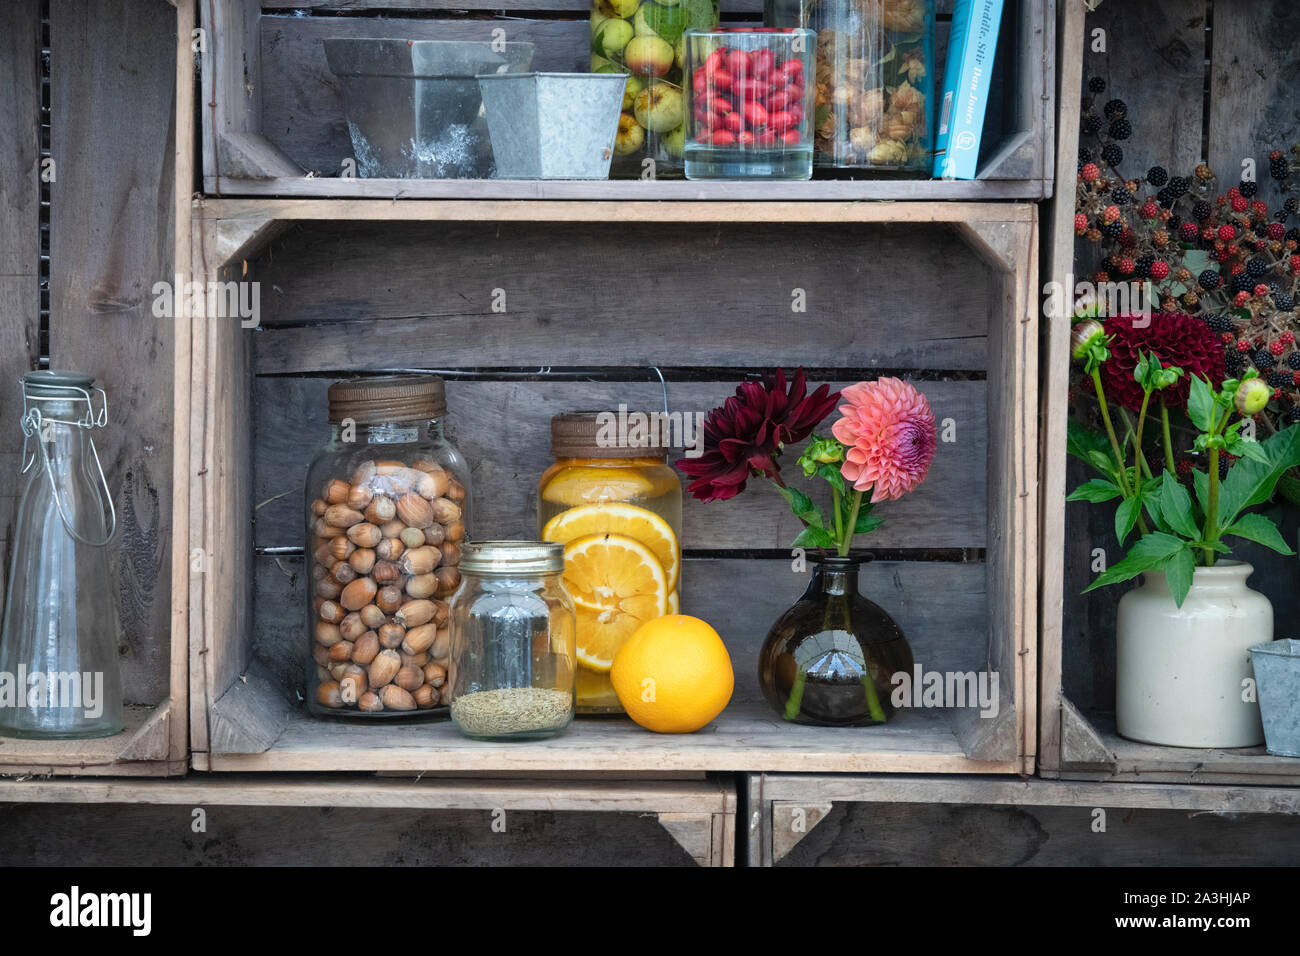 Old fashioned kilner gin jars infused with fruits and nuts with vases of cut flowers in a wooden crate display. UK Stock Photo